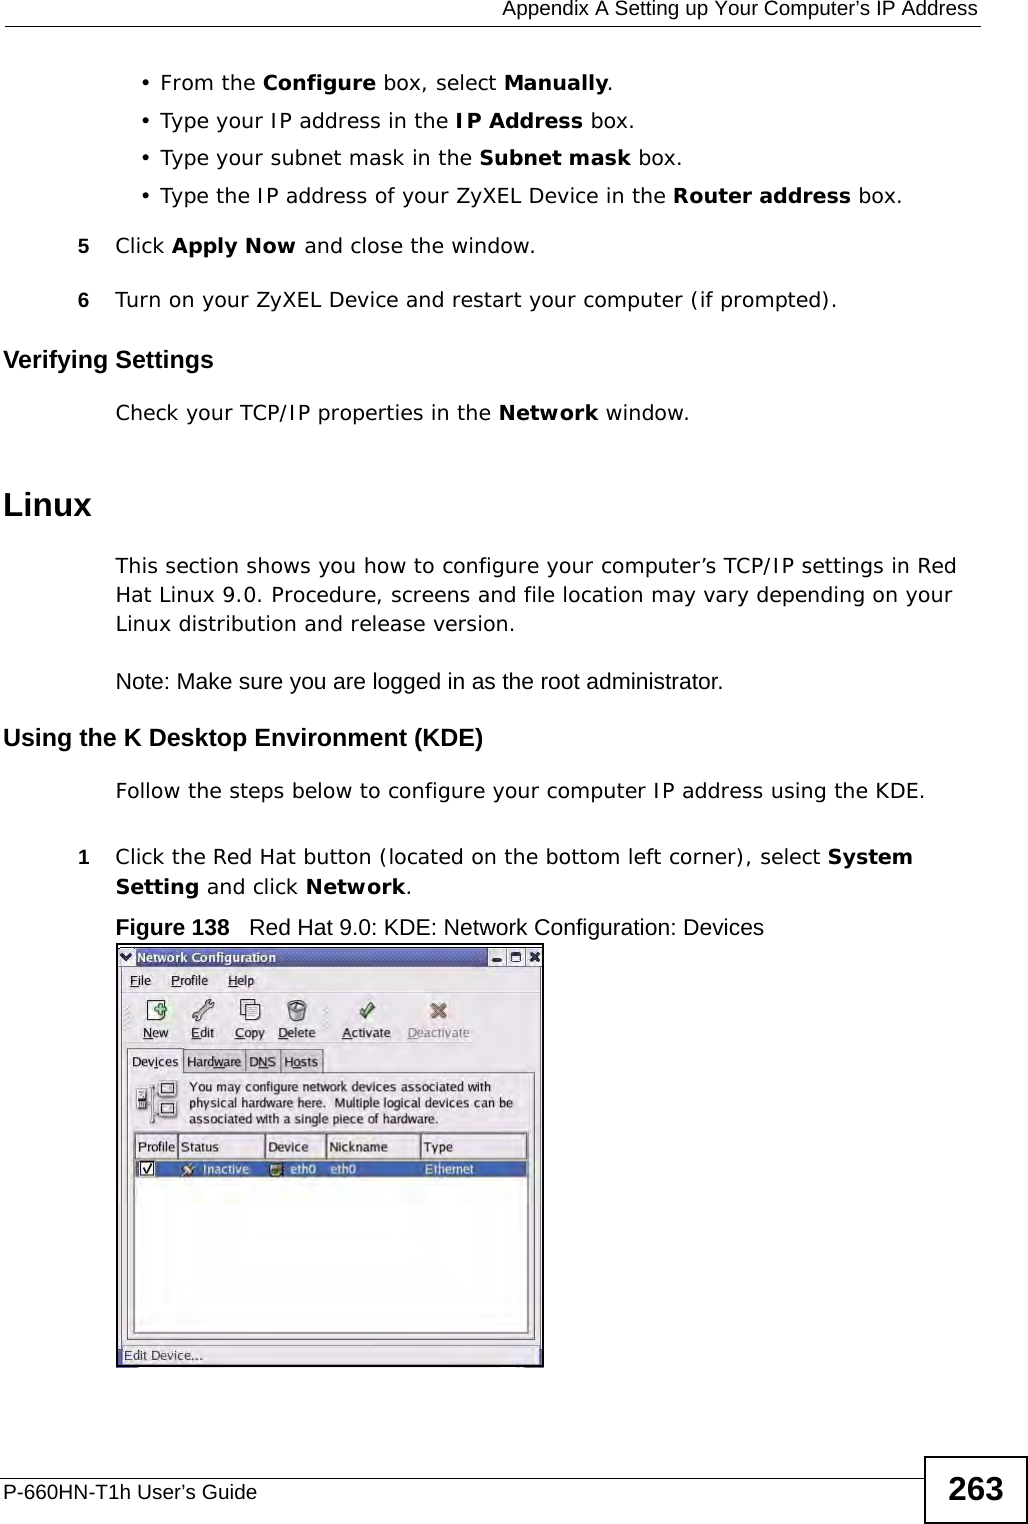  Appendix A Setting up Your Computer’s IP AddressP-660HN-T1h User’s Guide 263•From the Configure box, select Manually.• Type your IP address in the IP Address box.• Type your subnet mask in the Subnet mask box.• Type the IP address of your ZyXEL Device in the Router address box.5Click Apply Now and close the window.6Turn on your ZyXEL Device and restart your computer (if prompted).Verifying SettingsCheck your TCP/IP properties in the Network window.Linux This section shows you how to configure your computer’s TCP/IP settings in Red Hat Linux 9.0. Procedure, screens and file location may vary depending on your Linux distribution and release version. Note: Make sure you are logged in as the root administrator. Using the K Desktop Environment (KDE)Follow the steps below to configure your computer IP address using the KDE. 1Click the Red Hat button (located on the bottom left corner), select System Setting and click Network.Figure 138   Red Hat 9.0: KDE: Network Configuration: Devices 